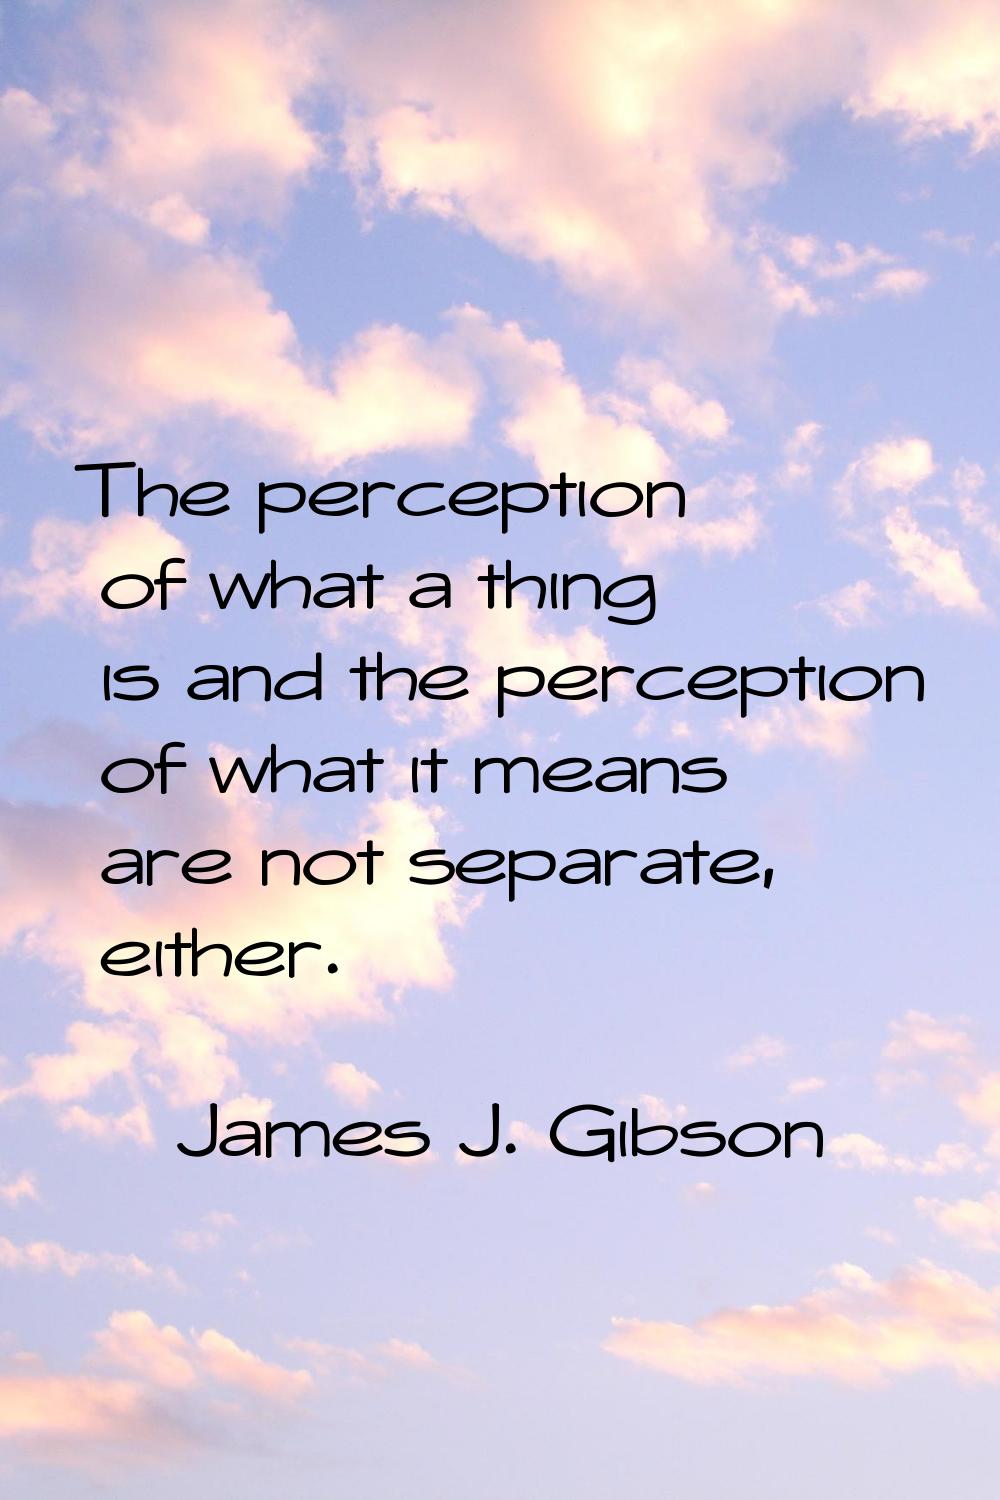 The perception of what a thing is and the perception of what it means are not separate, either.